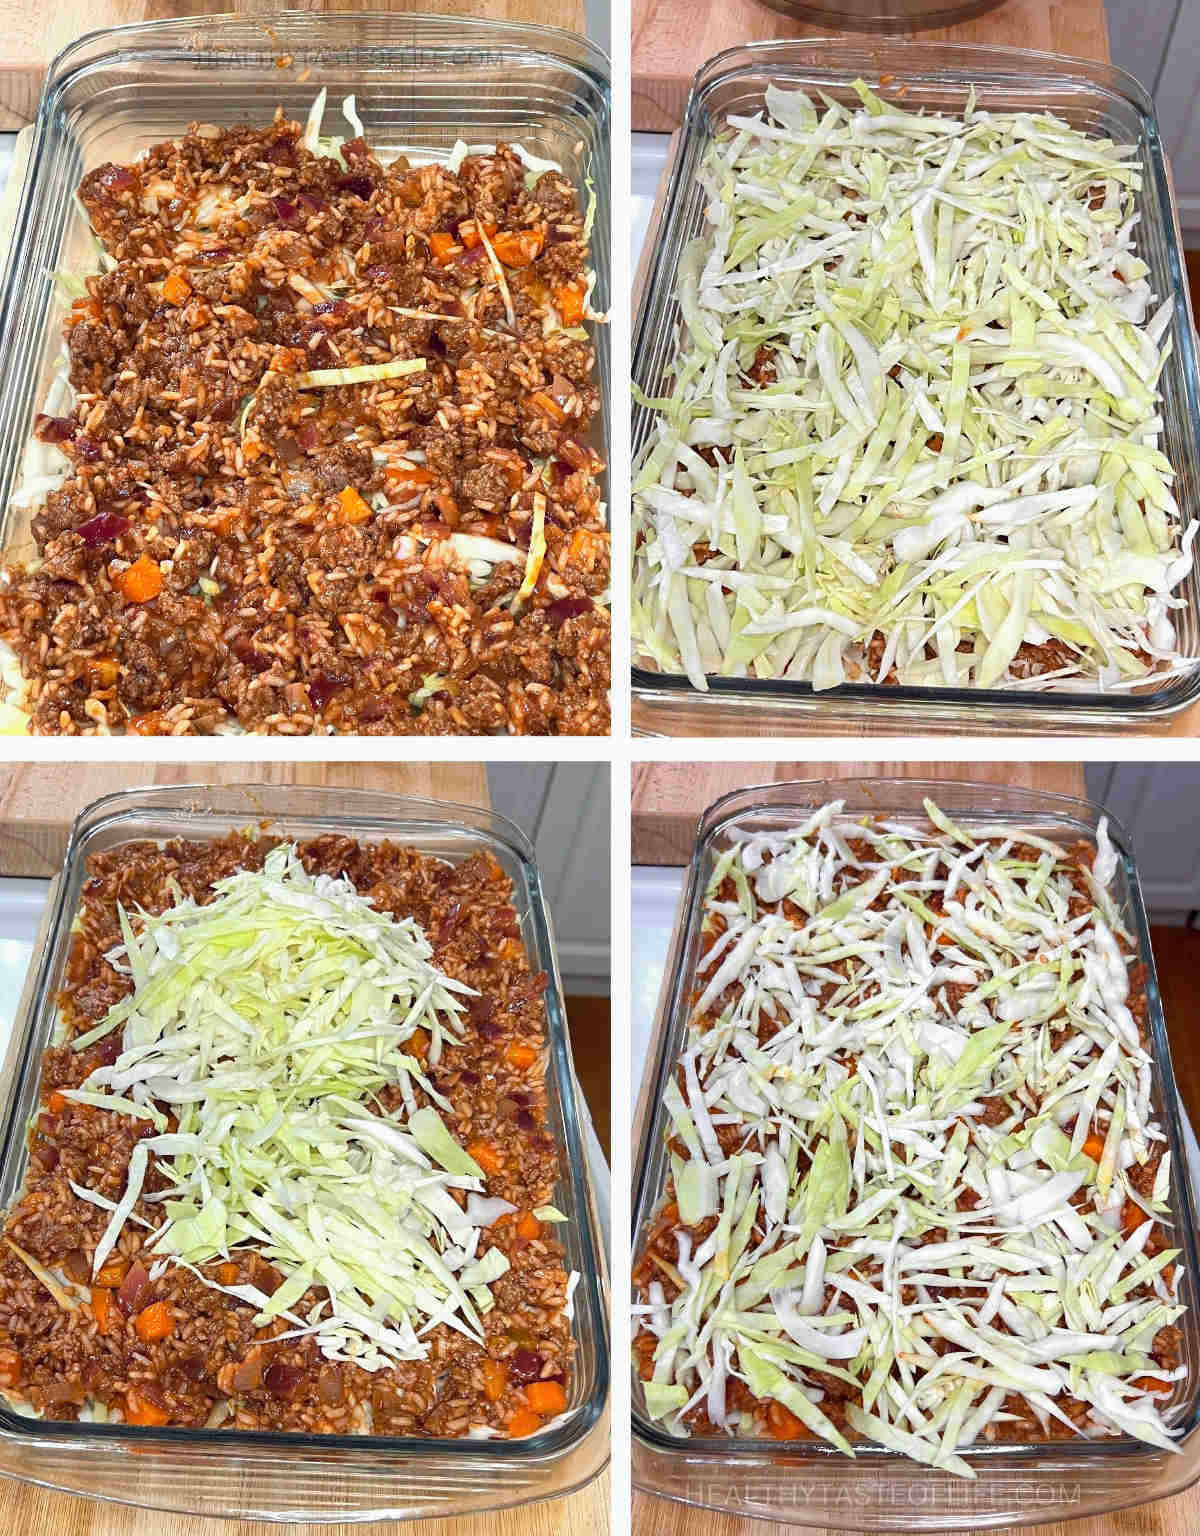 Process shots showing how to assmeble the unstuffed lazy cabbage roll casserole and how to layer the cabbage, beef, rice and tomato sauce.